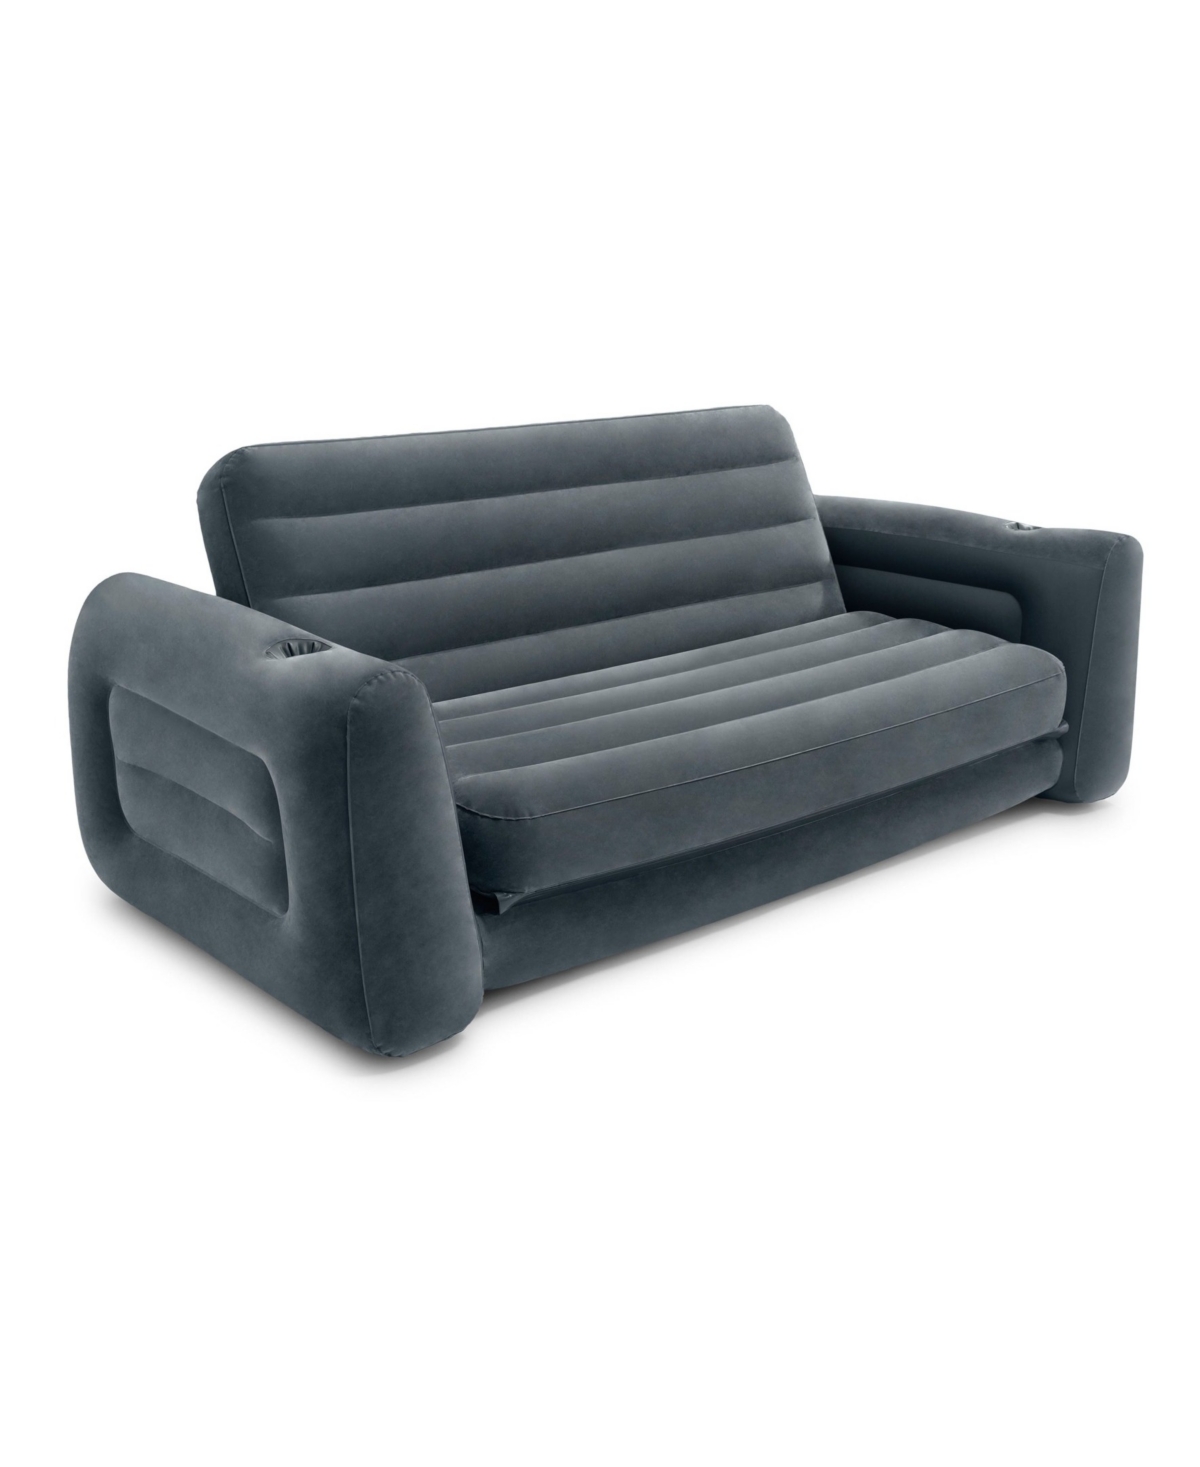 Intex Inflatable Pull Out Sofa Chair Sleeper In Multi